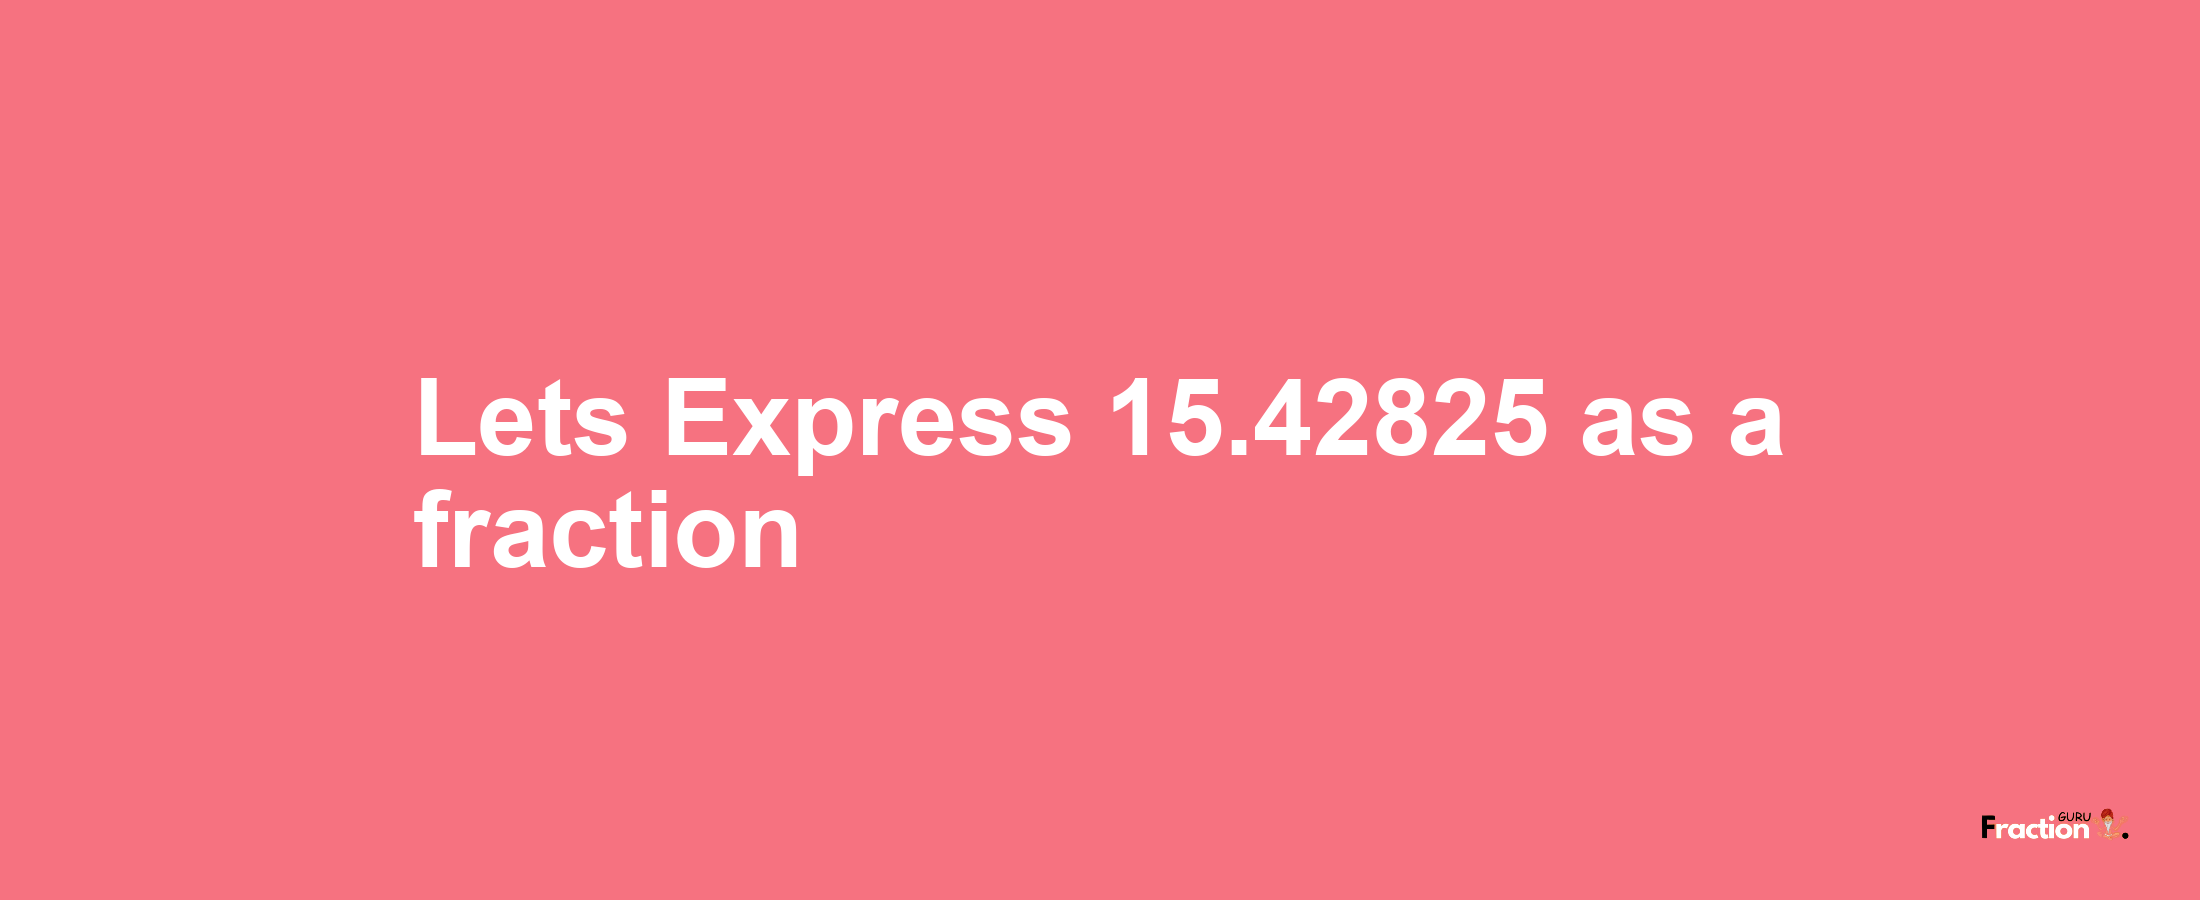 Lets Express 15.42825 as afraction